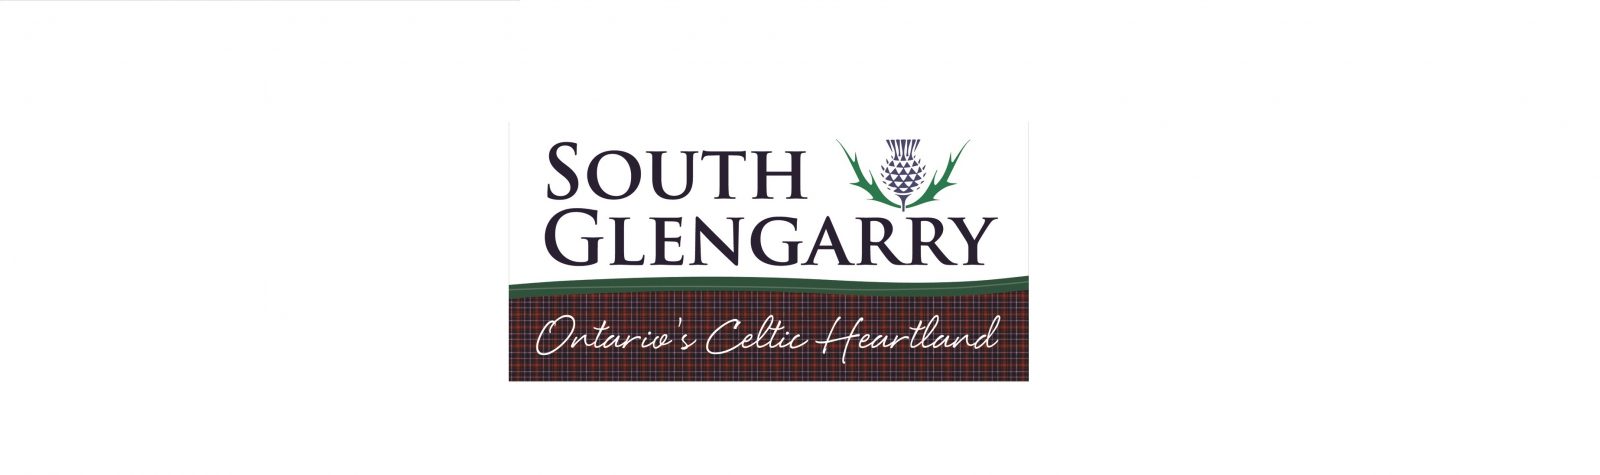 South Glengarry considering increasing facility fees